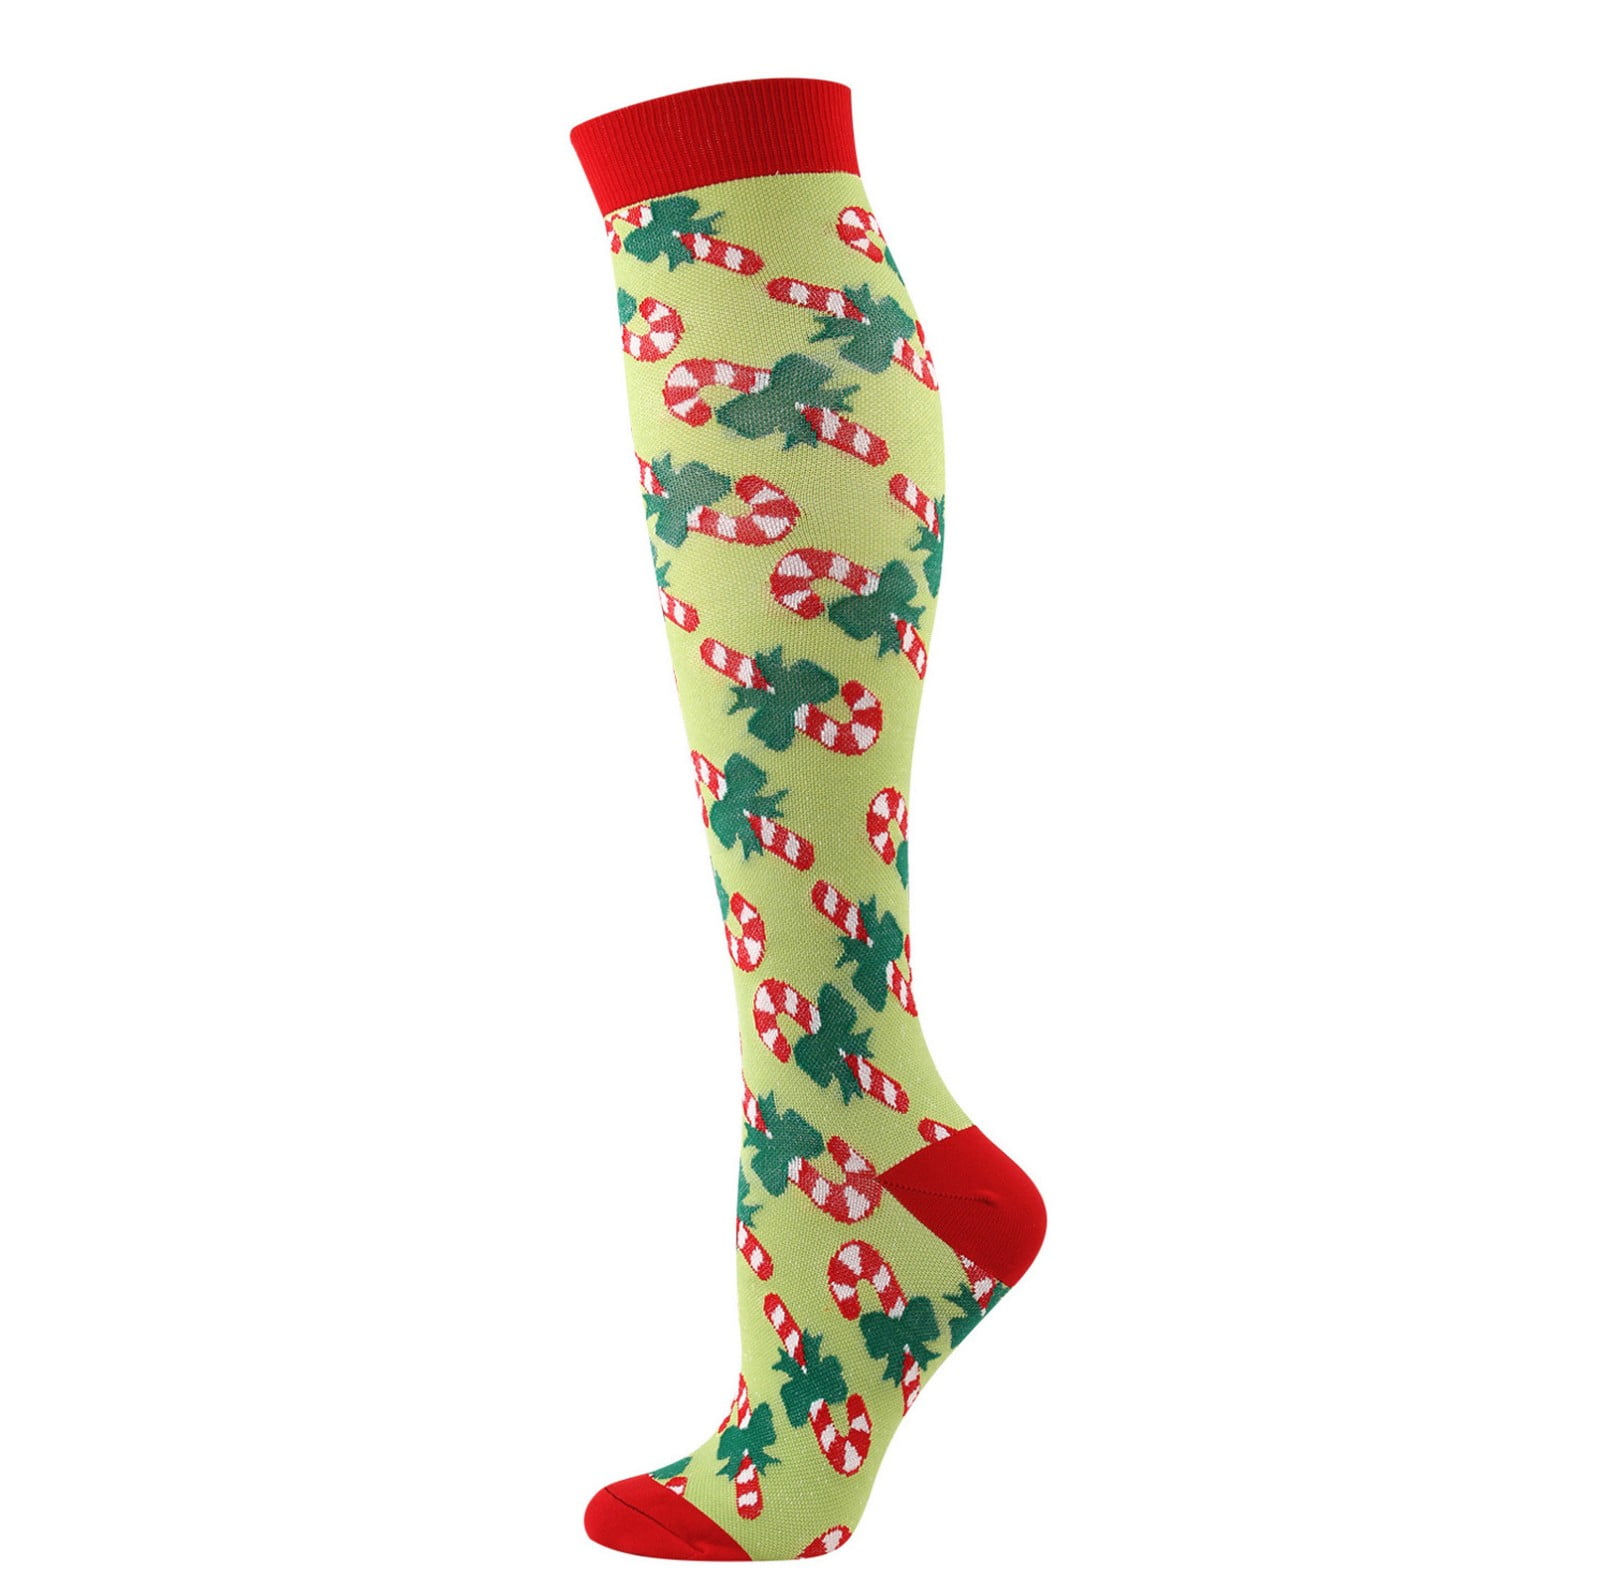 Strawberry Compression Socks For Women 3D Print Knee High Boot